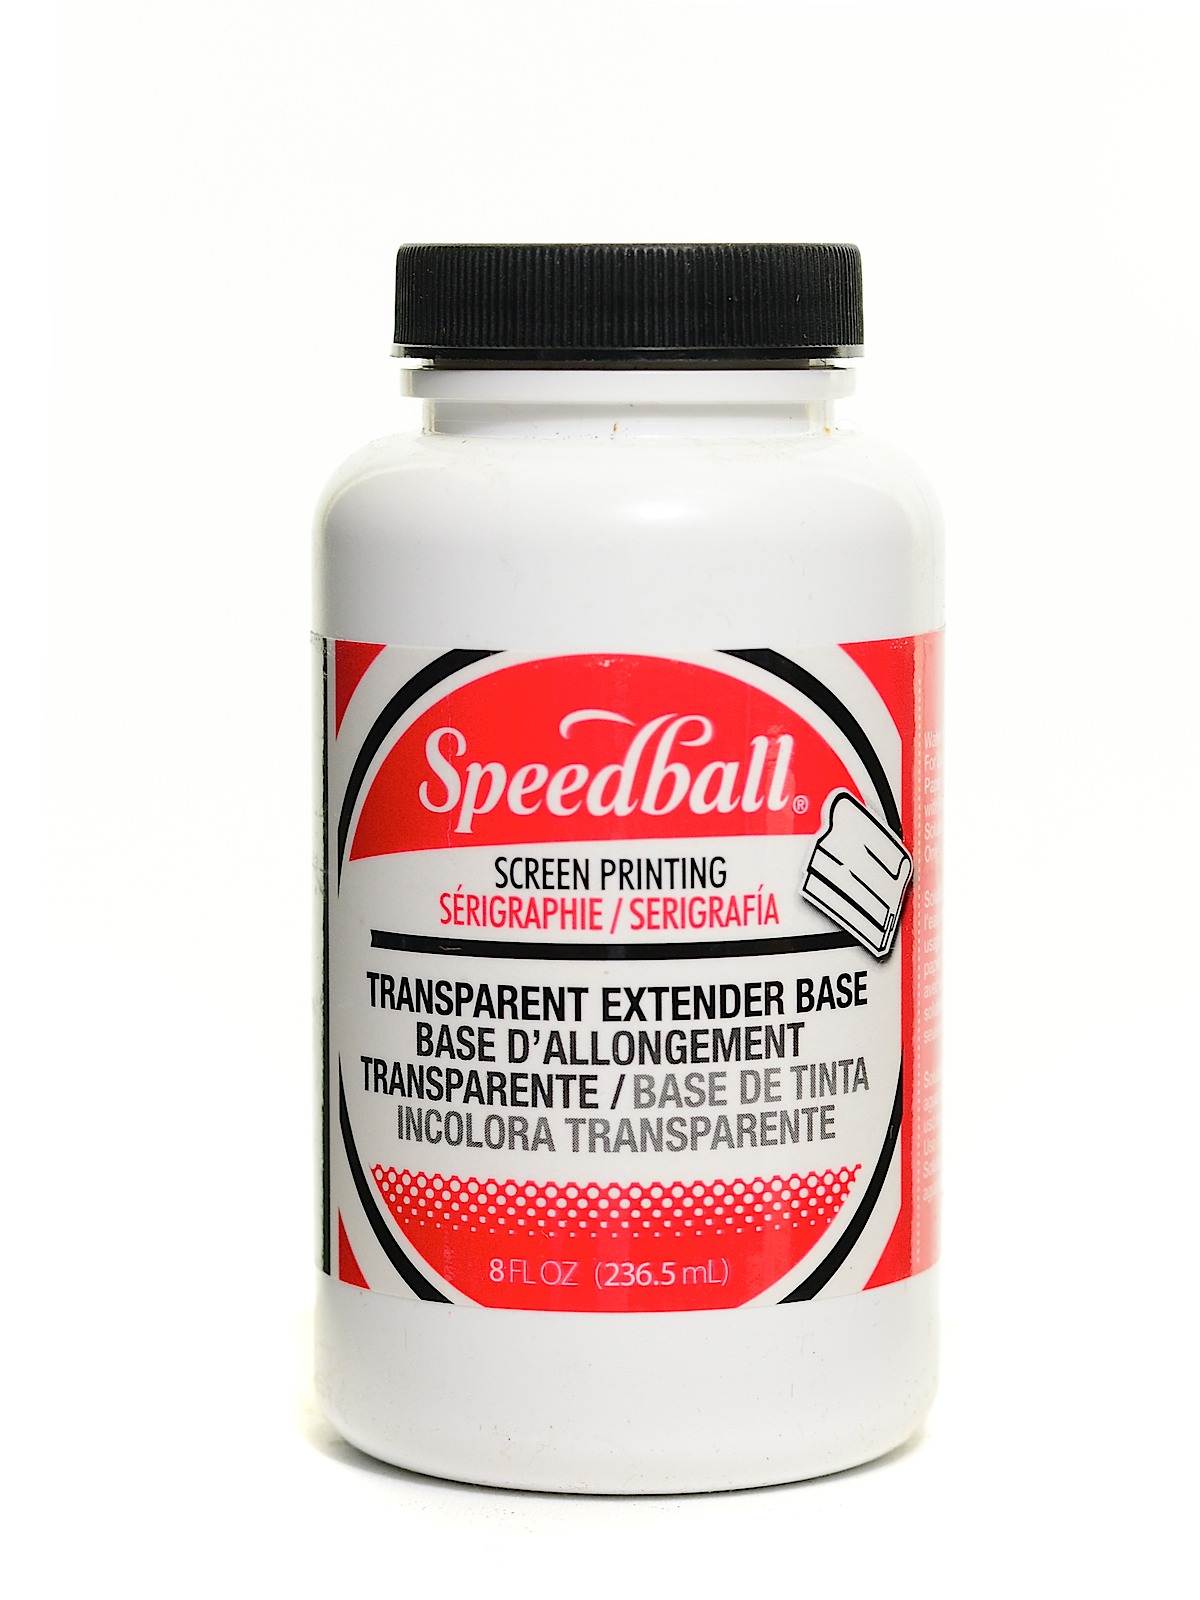 Water-soluble Transparent Extender Base 8 Oz.